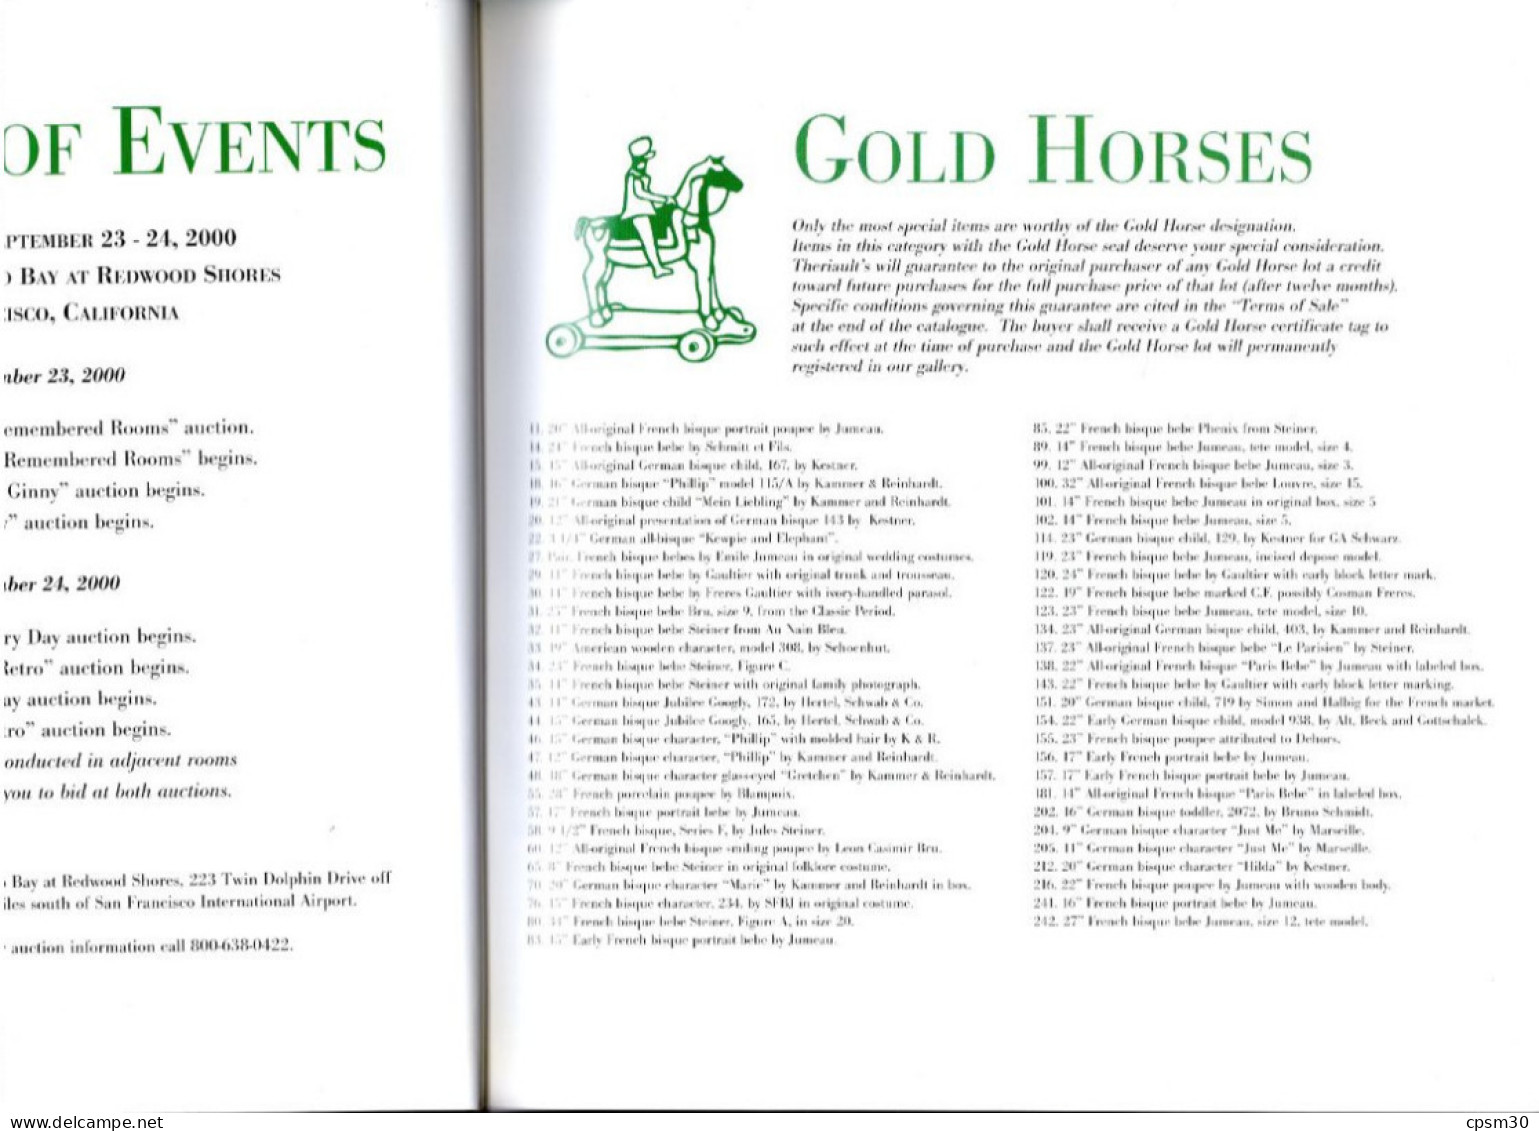 Livre, Echoes Of Old Remembered Rooms, Catalogued Auction Of Rare Antique Dolls And Dollhouses, September 2000 - 1950-Now